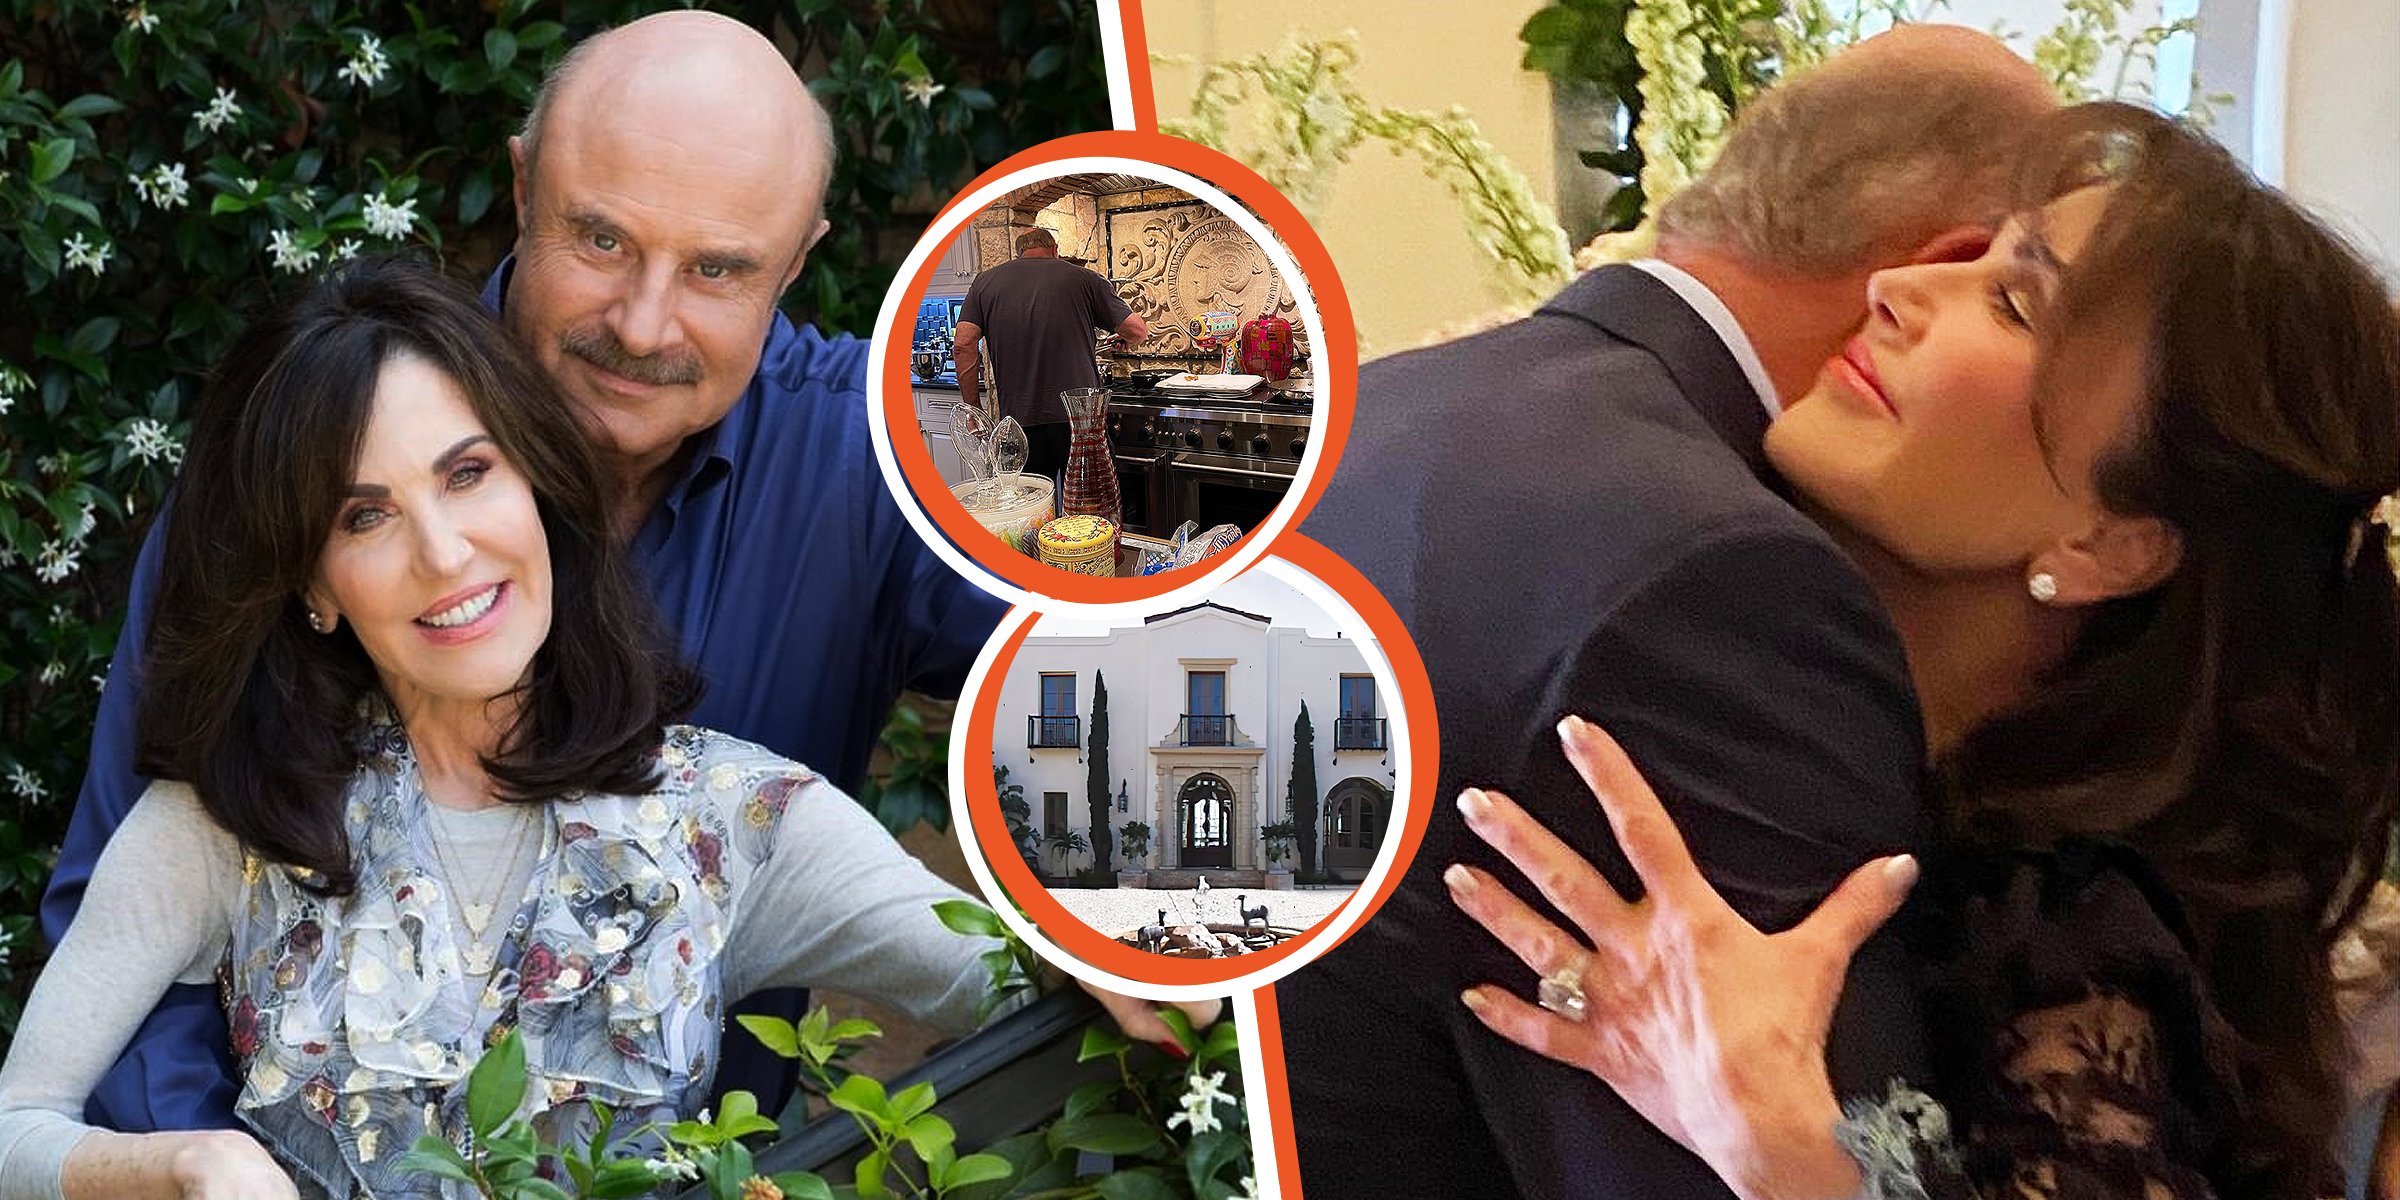 Robin McGraw and Dr. Phil McGraw, 2020 | Dr. Phil McGraw, 2021 | The McGraw Beverly Hills mansion, 2021 | Dr. Phil McGraw and Robin McGraw, 2021 | Source: Instagram.com/robin_mcgraw | Instagram.com/jaypmcgraw | YouTube.com/TheRichest